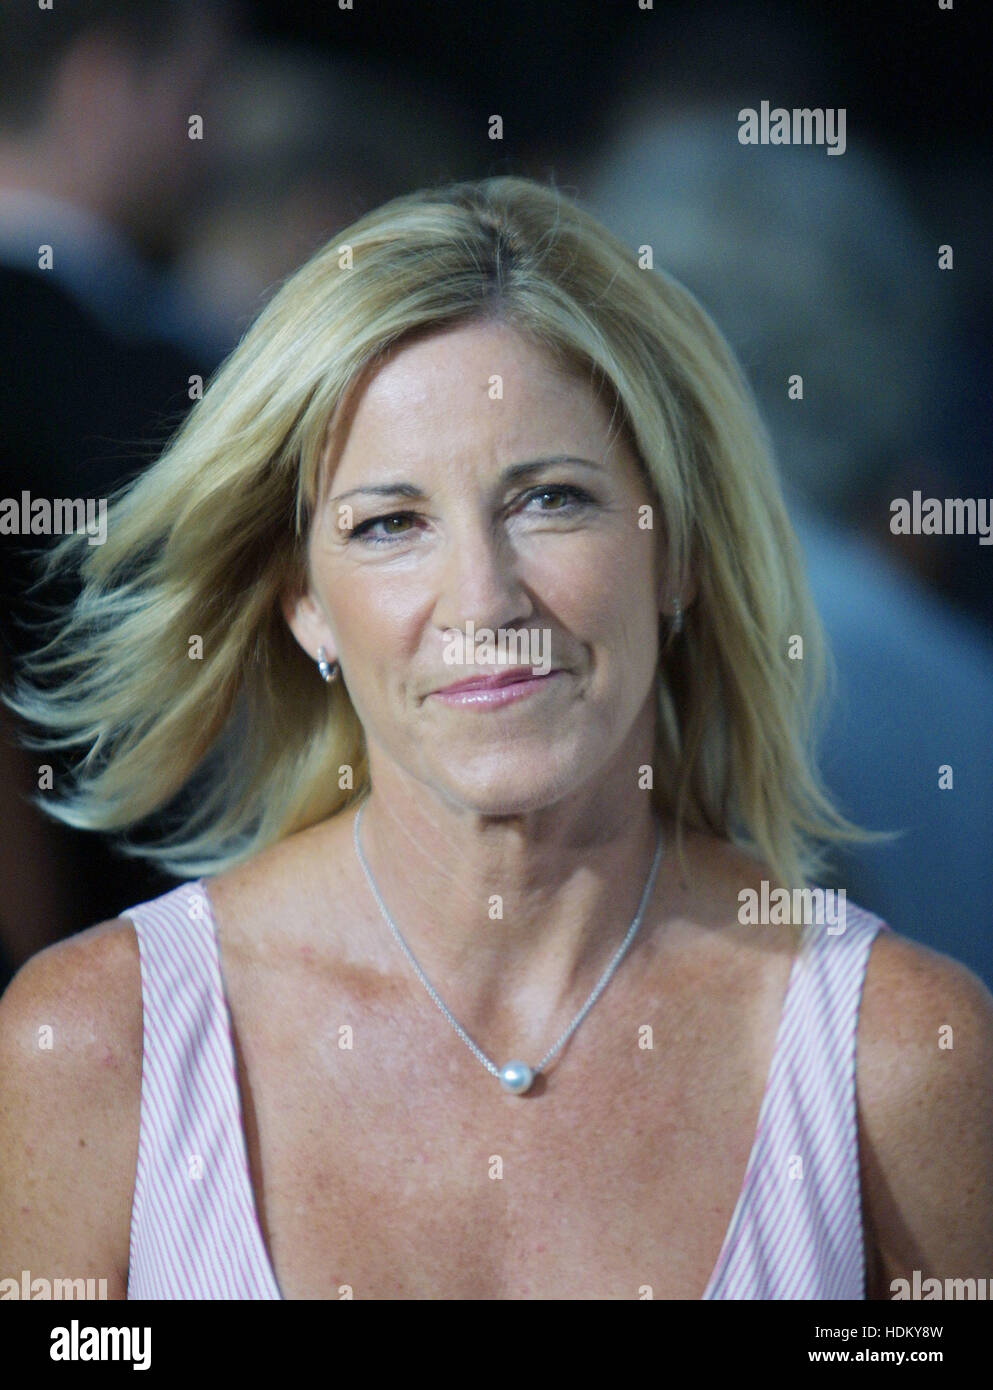 Wimbledon Champion Chris Evert at the premiere of 'Wimbledon' in Beverly Hills on September 13, 2004 in Los Angeles, California. Photo credit: Francis Specker Stock Photo